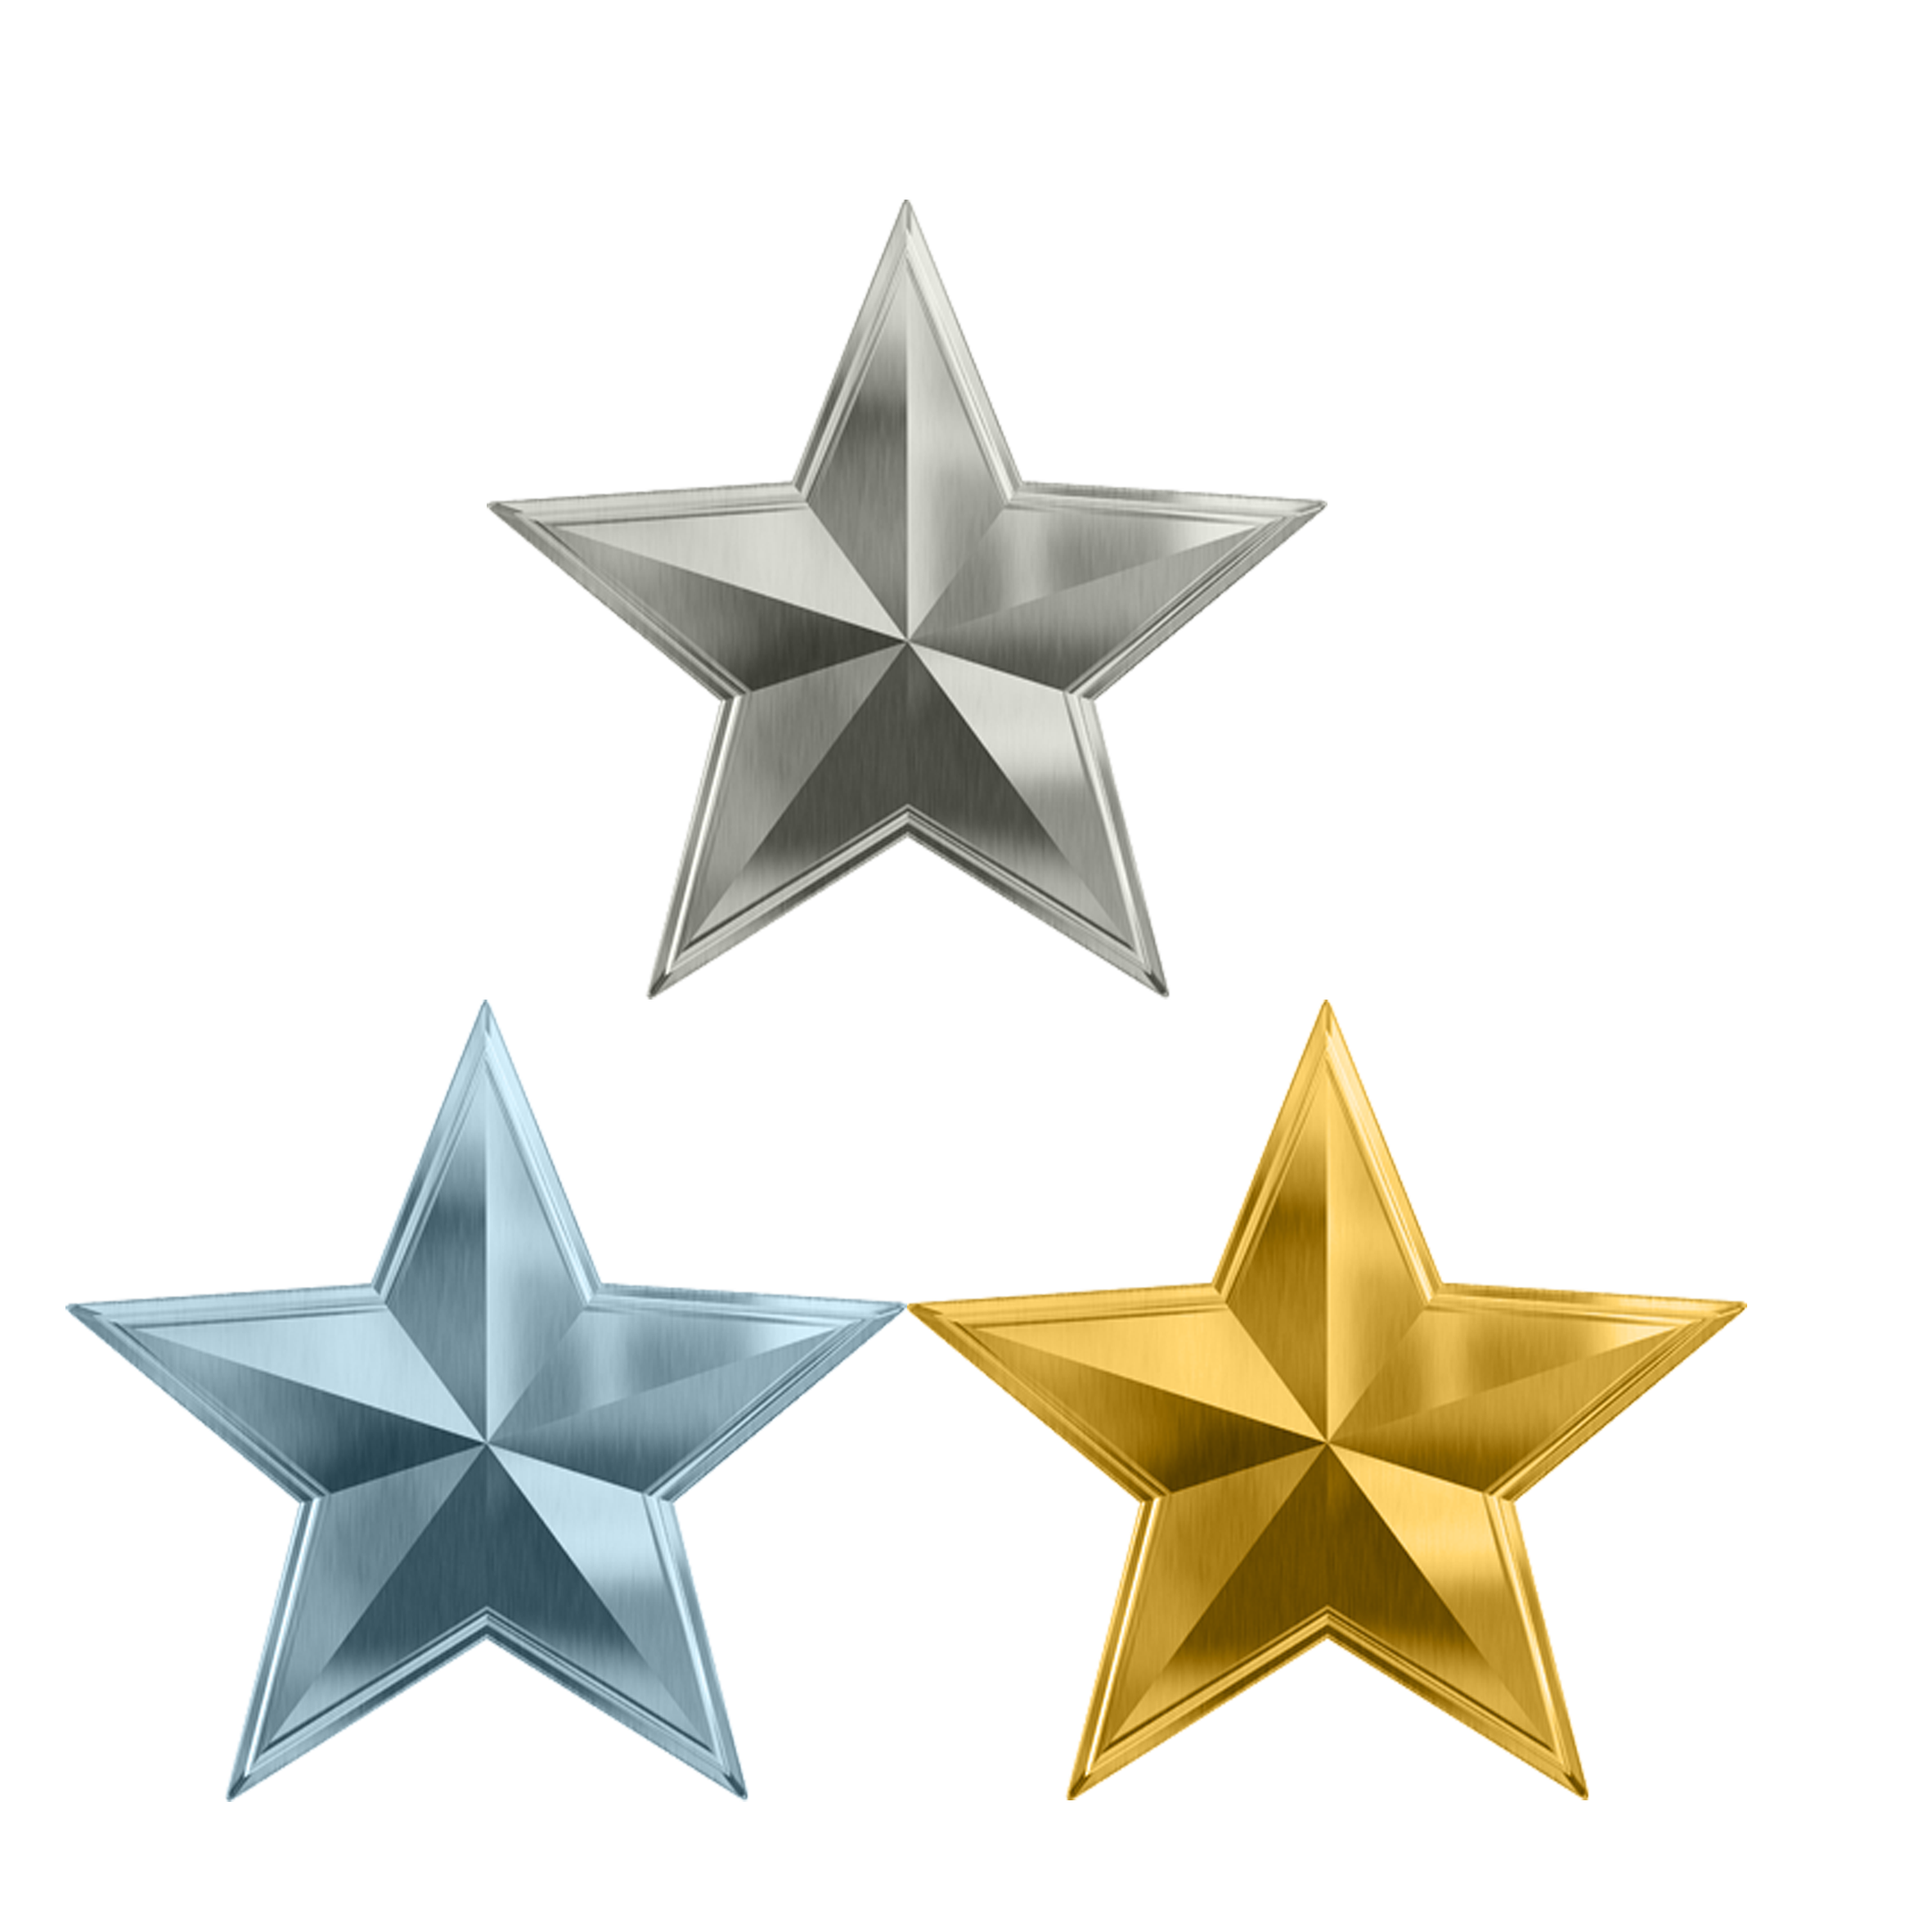 Cluster Star Metal Gold Free Transparent Image HQ Clipart